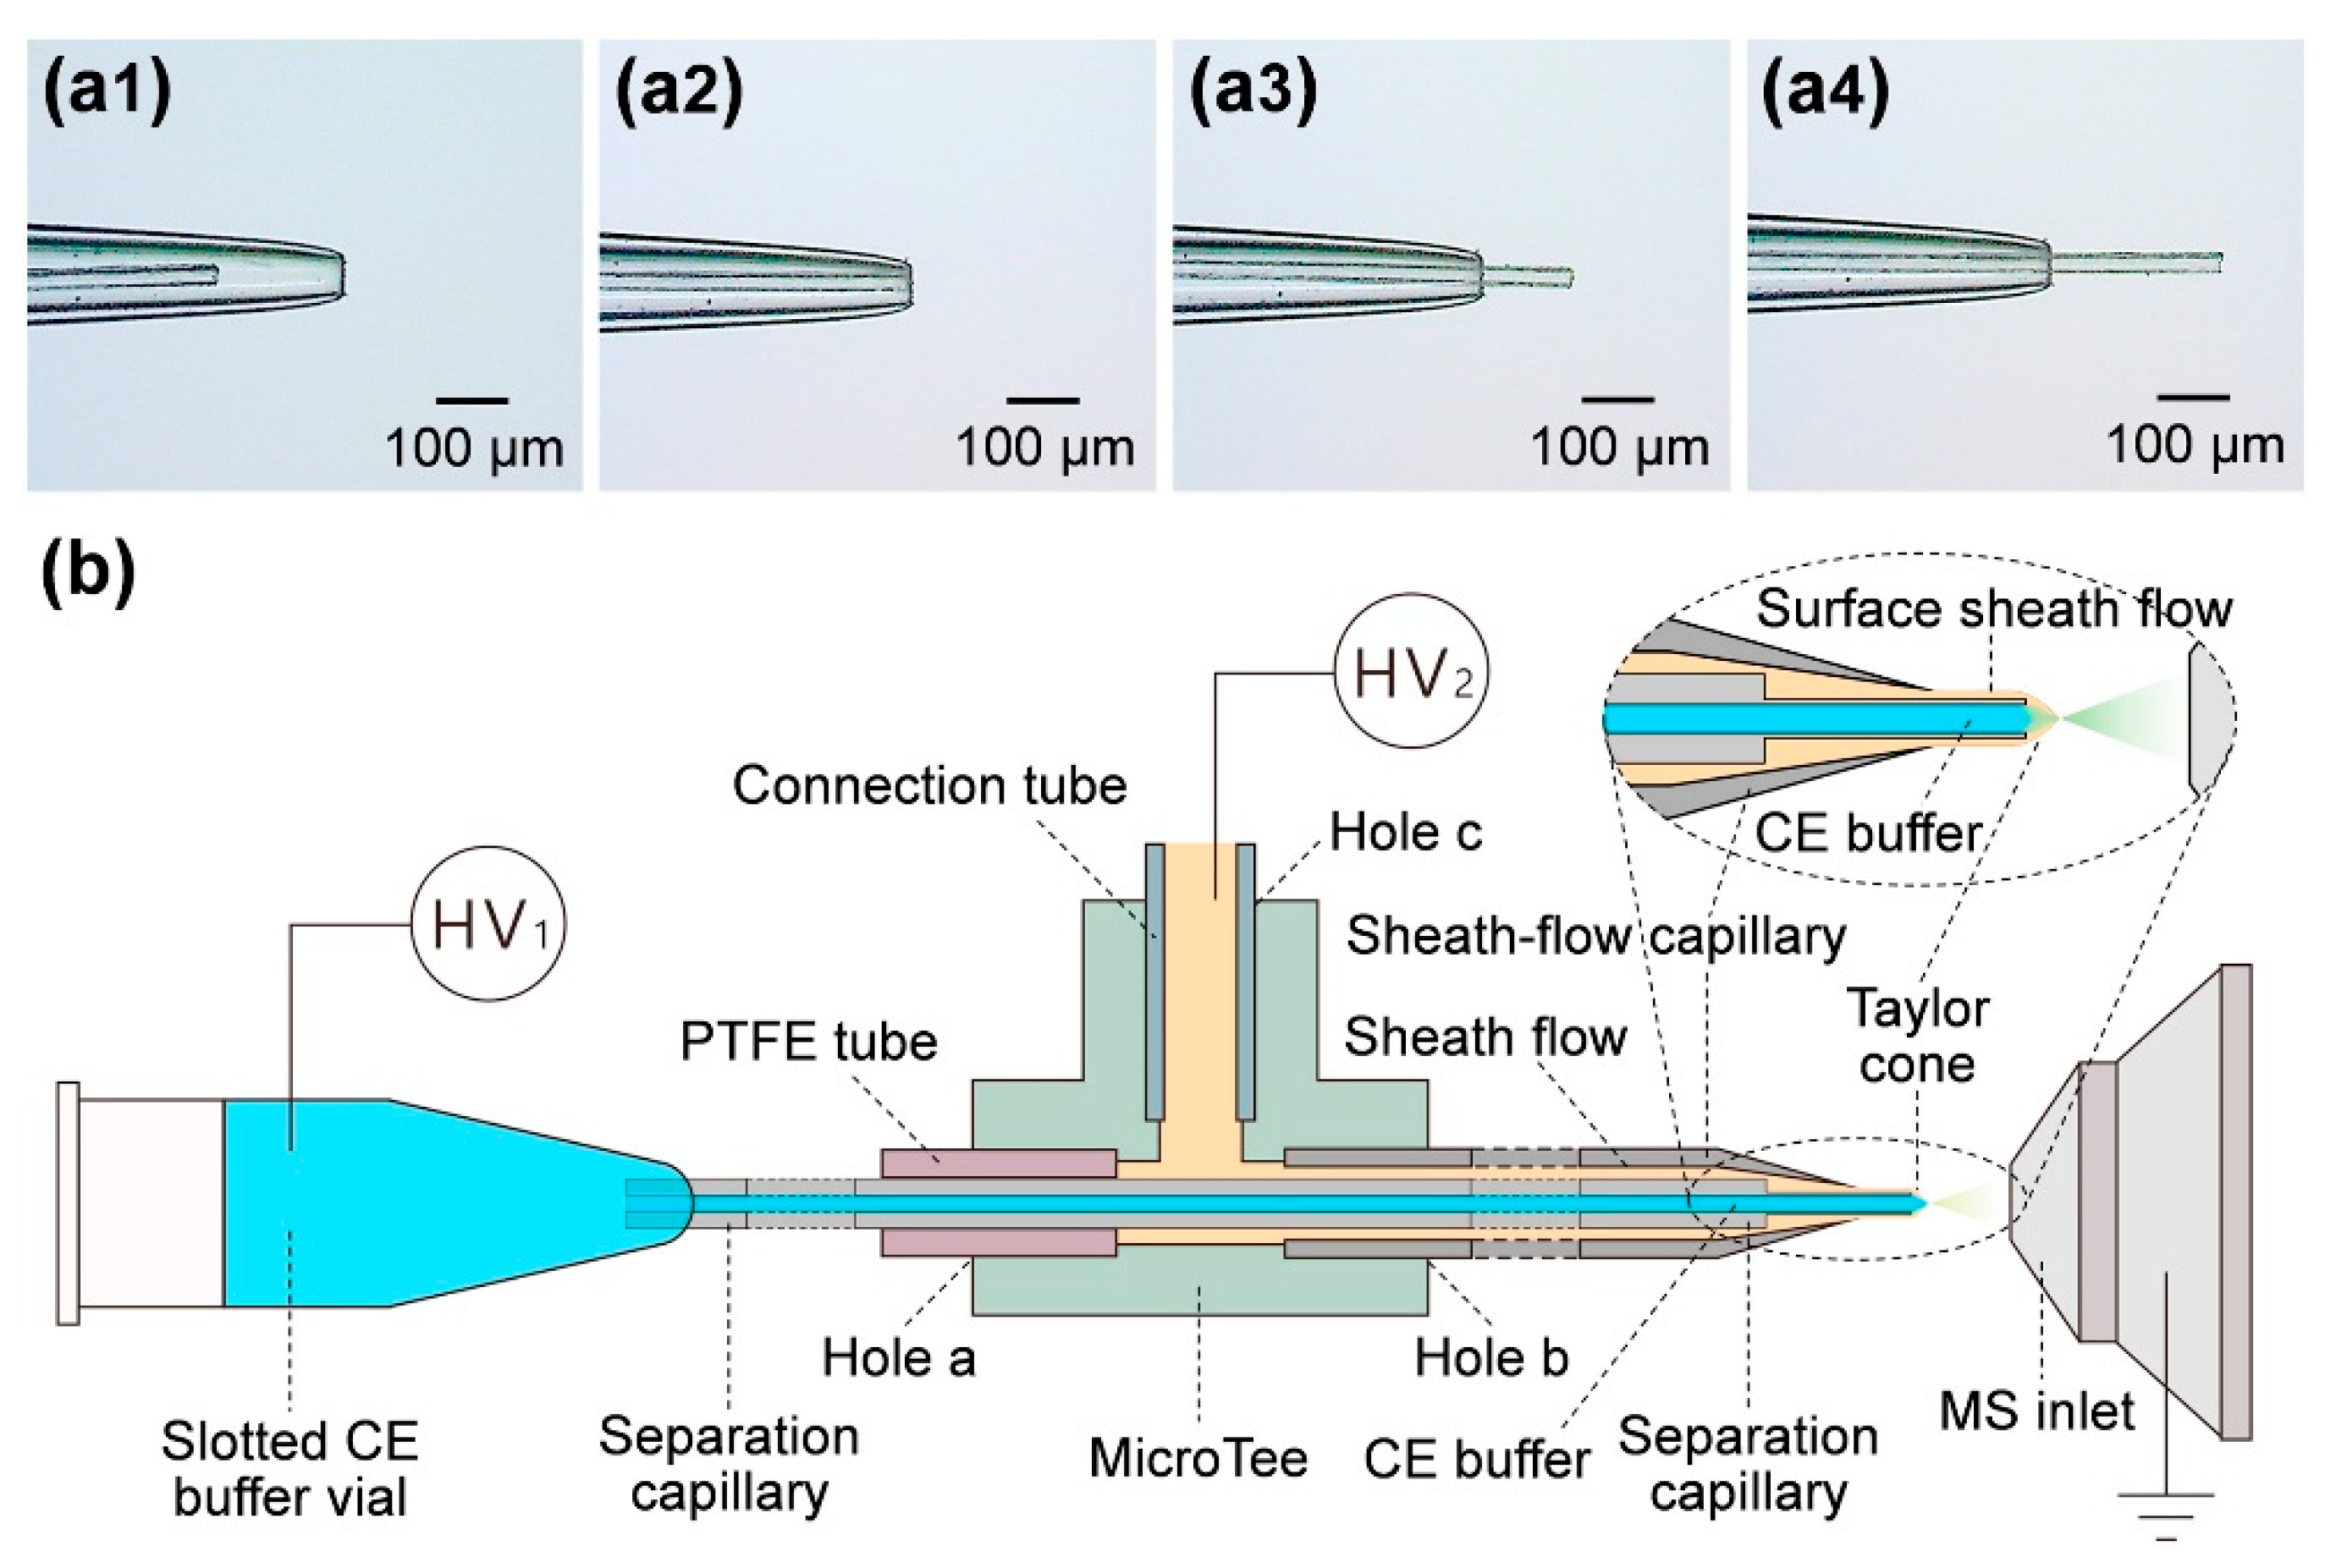 nanoCEasy: An Easy, Flexible, and Robust Nanoflow Sheath Liquid Capillary  Electrophoresis-Mass Spectrometry Interface Based on 3D Printed Parts